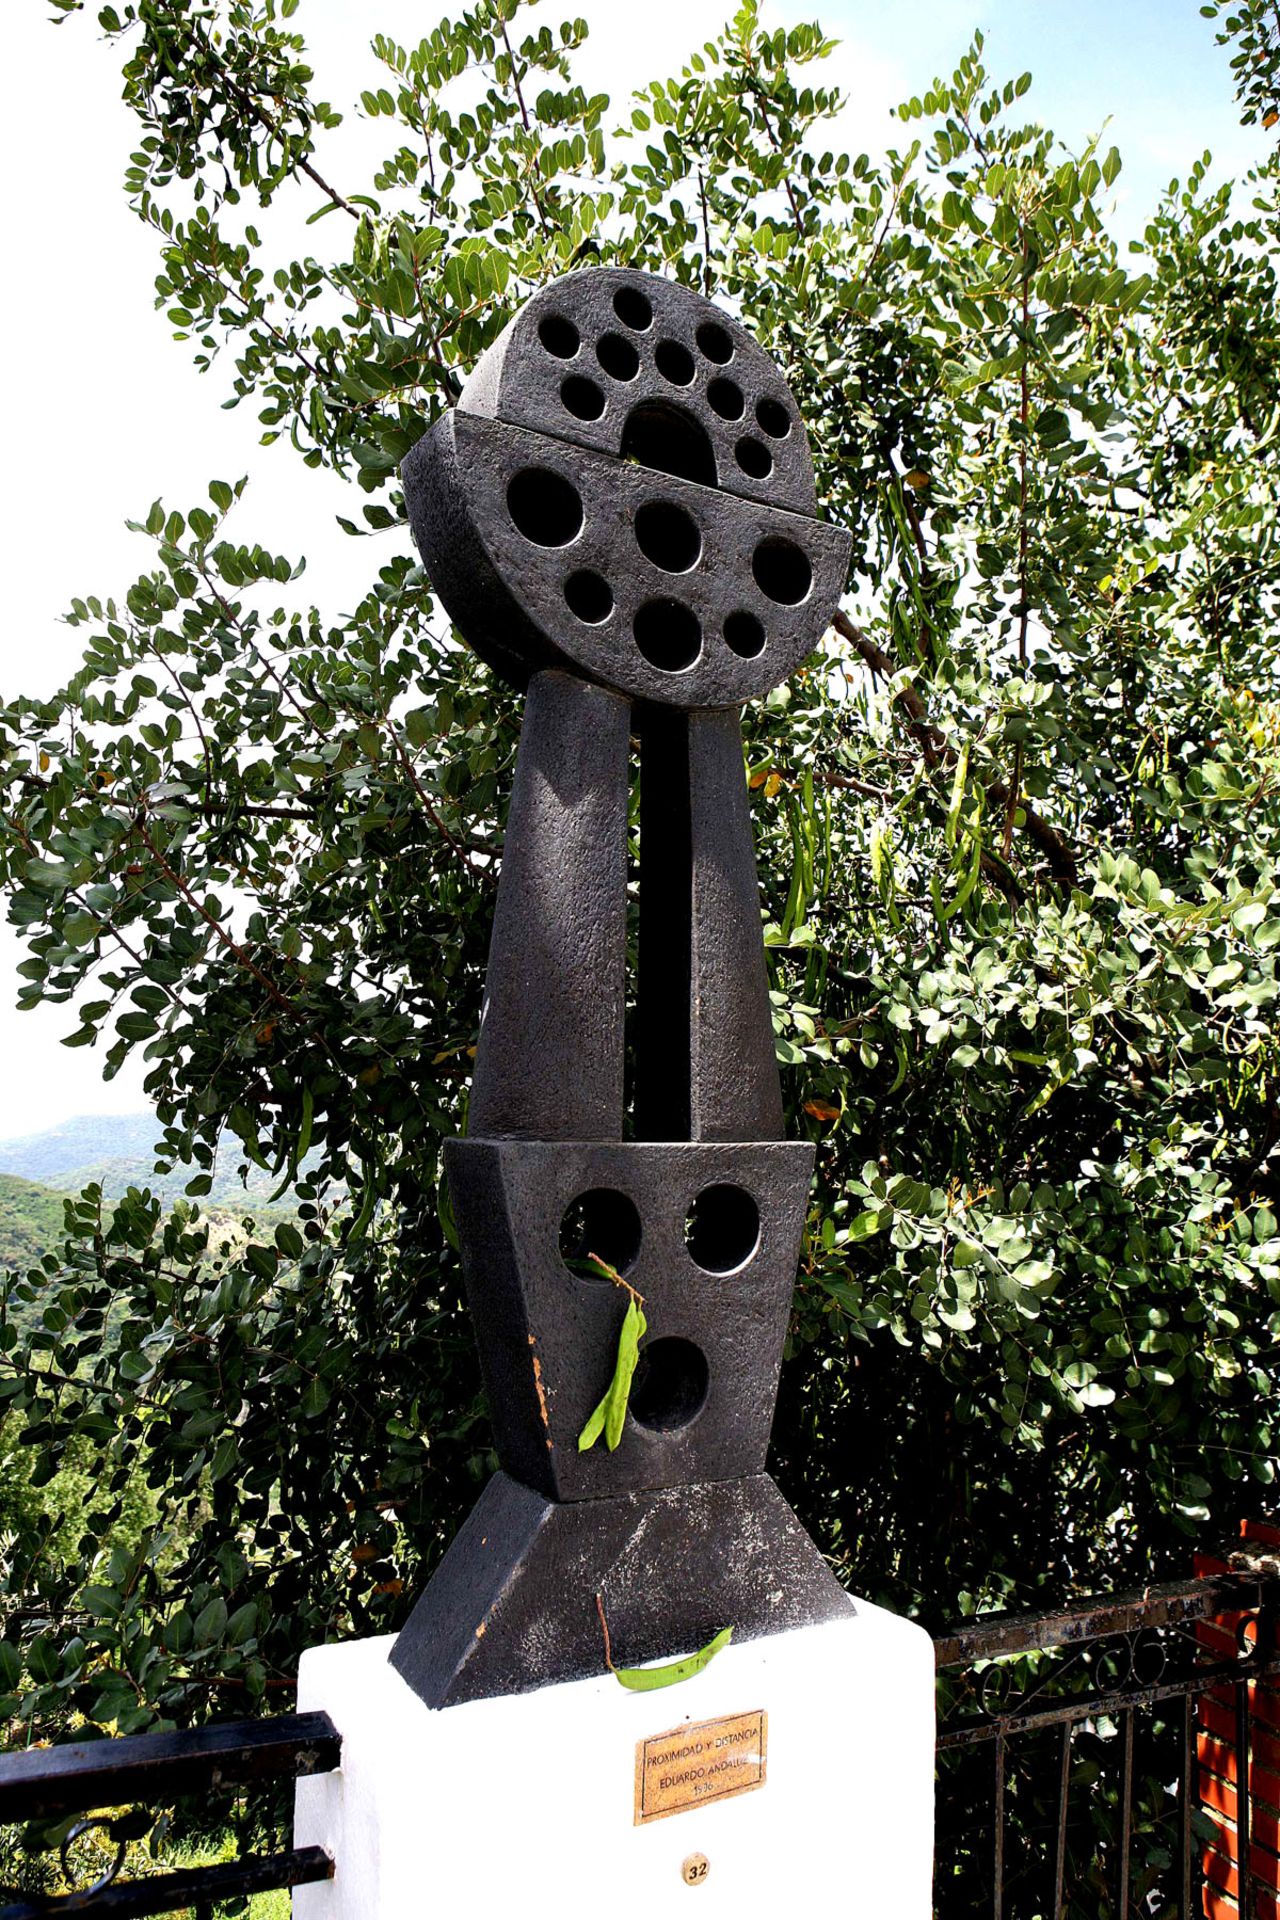 This piece titled "Proximidad y distancia" is by Eduardo Andaluz. Genalguacil's festival has reportedly inspired plans for a similar project in Canada.